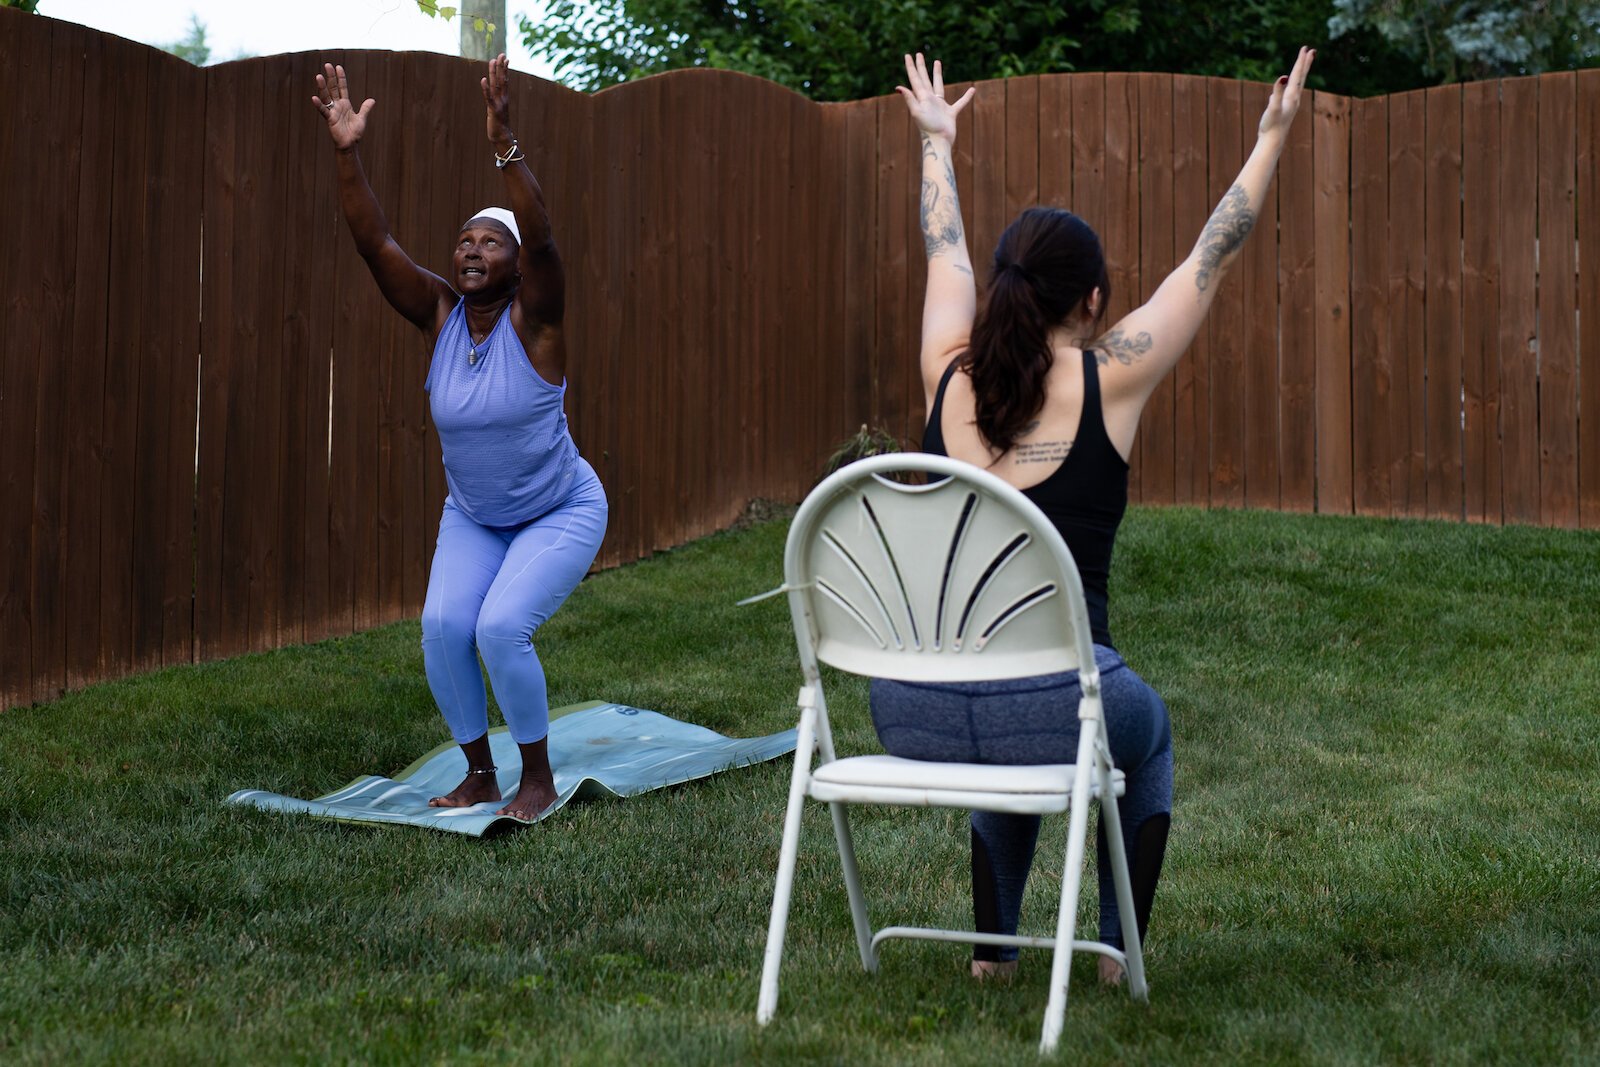 Diane Rogers, left, and Haley Evans, right, lead an inclusive, outdoor yoga class for Rooted Connection, LLC.